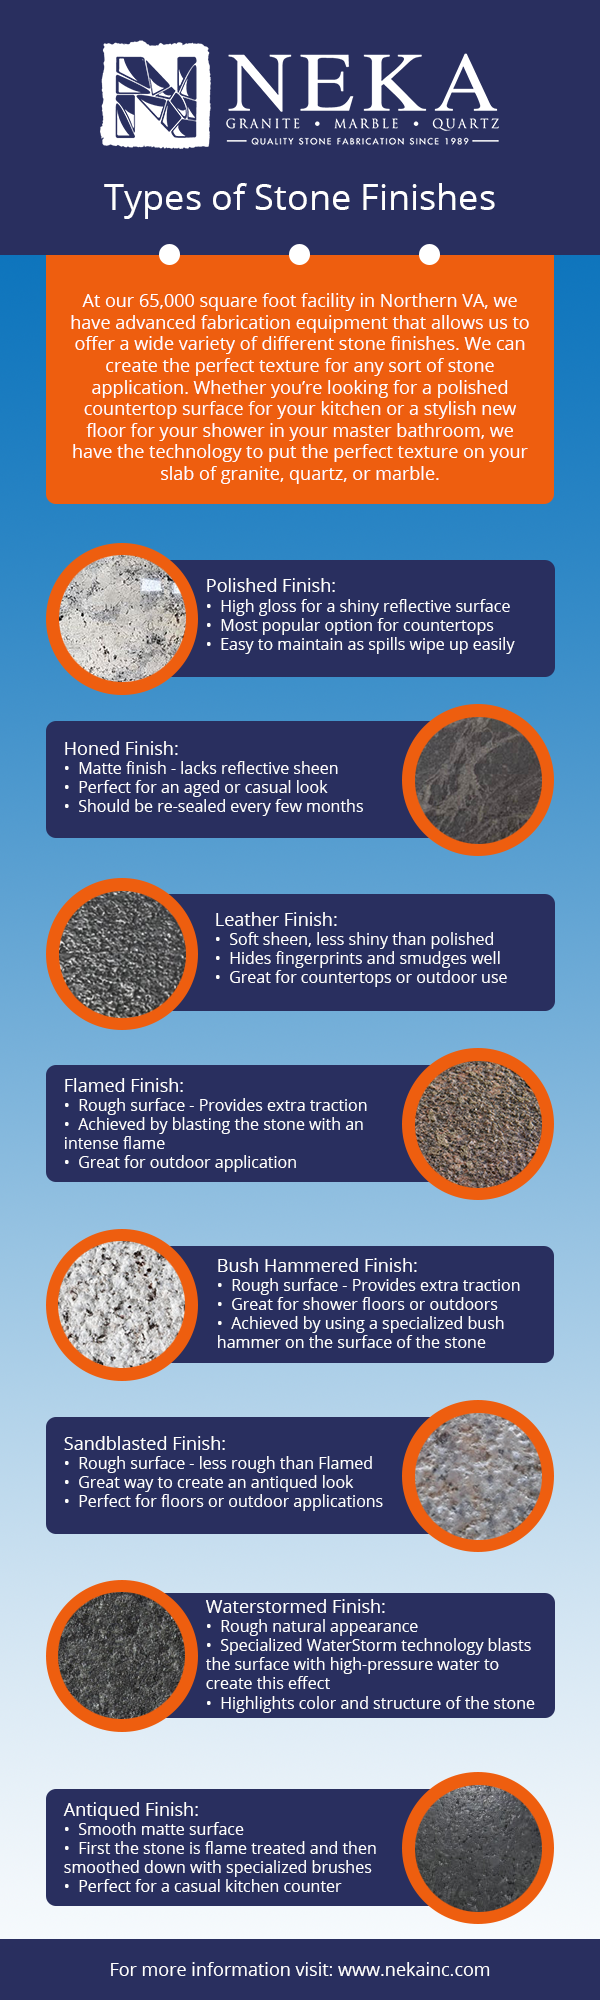 Infographic with stone finishing options available at NEKA Granite Marble Quartz